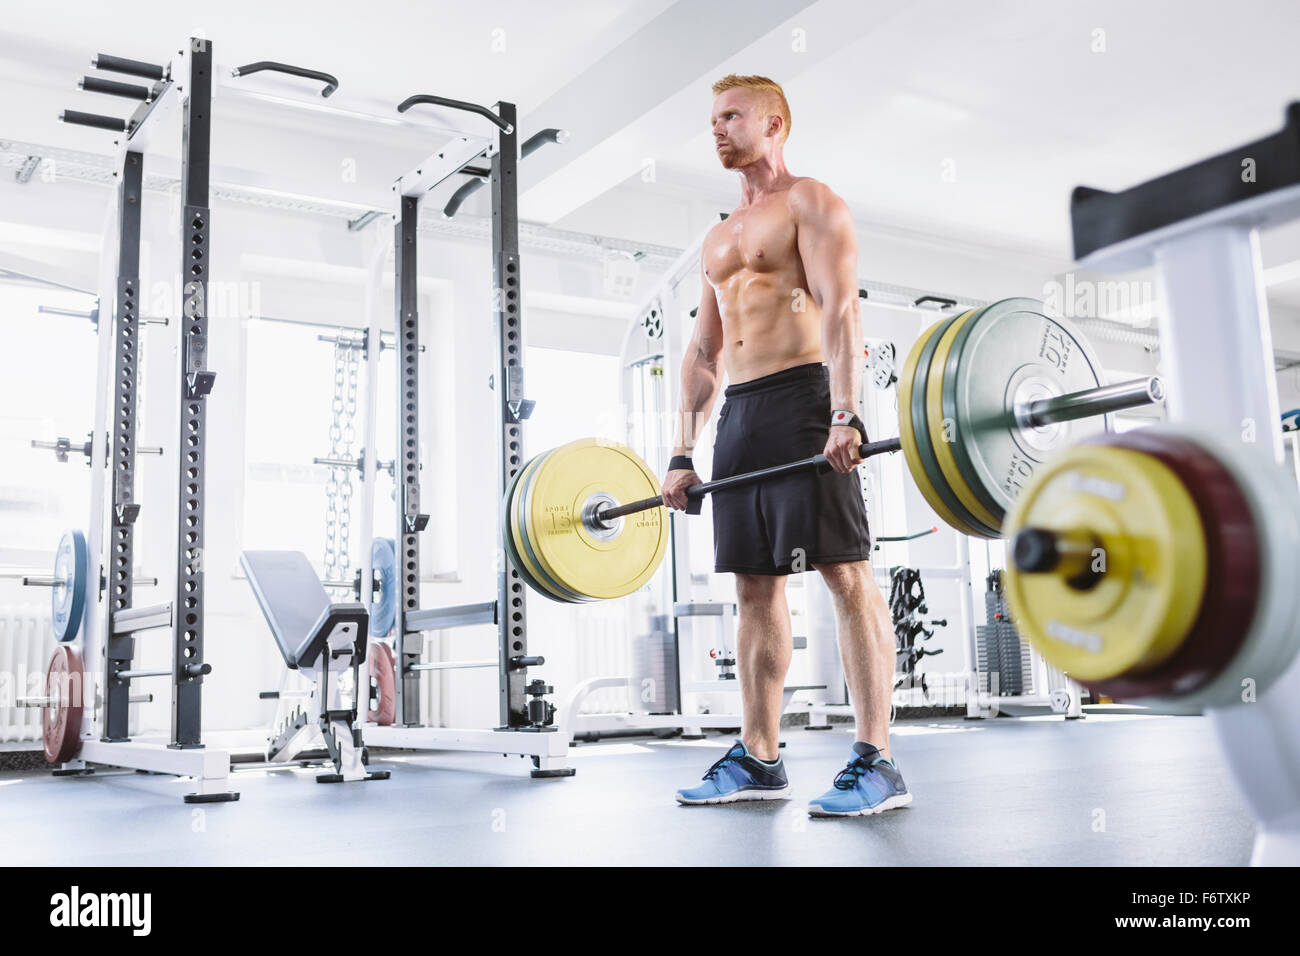 Physical athlete doing deadlifts Stock Photo